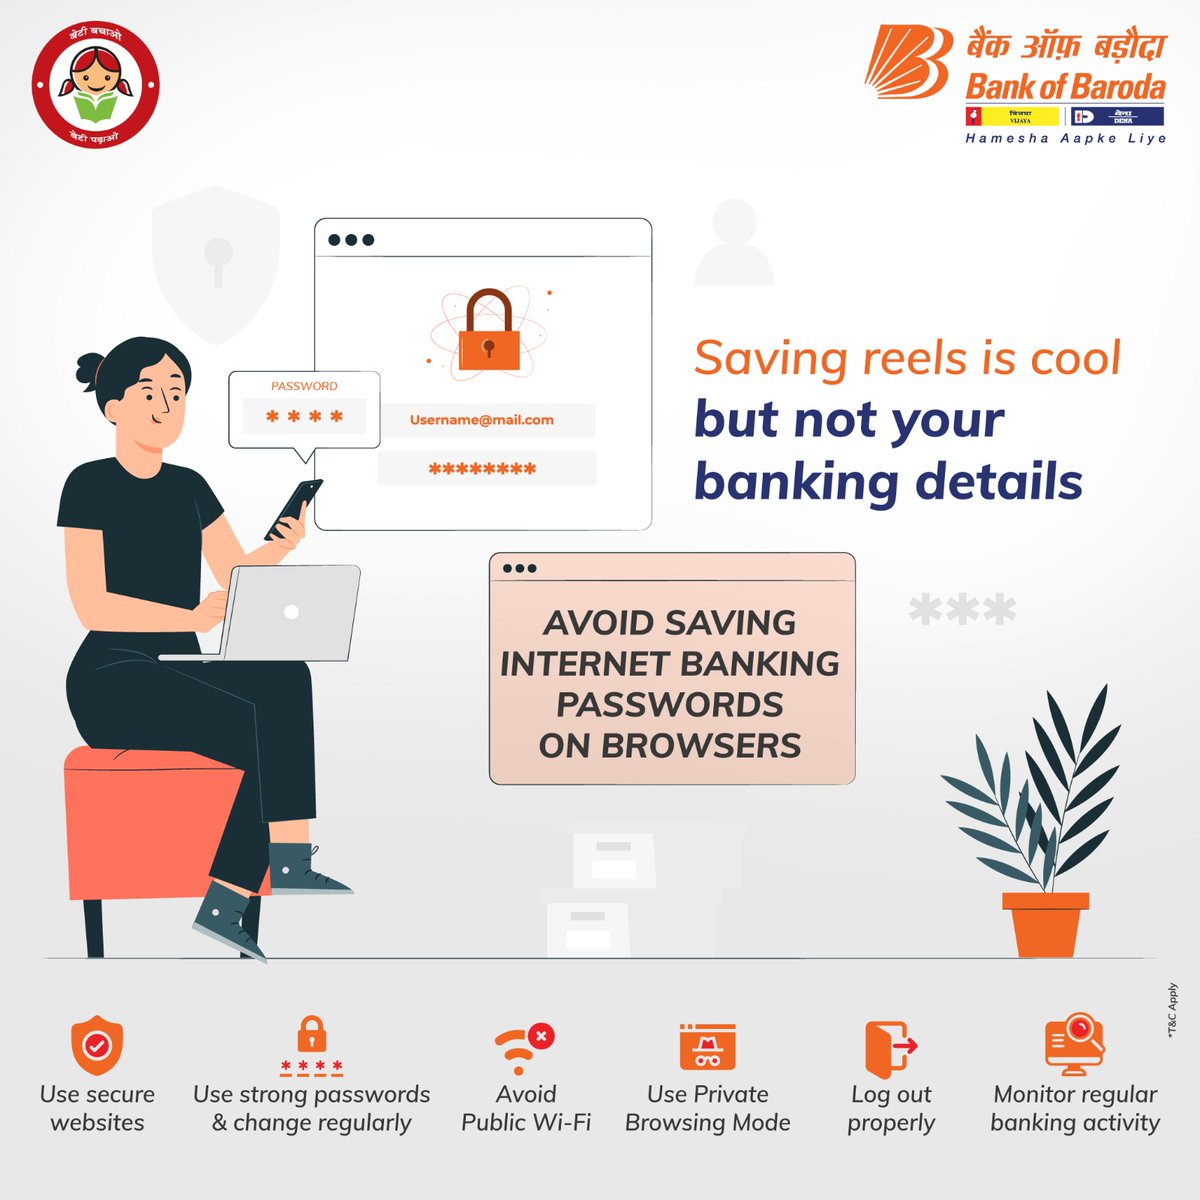 Prioritizing the security of your internet banking passwords not only safeguards your financial information but also helps protect your overall digital security and privacy.   
To know more click here: bit.ly/4aErZwU

#CyberSecurity #InternetBanking #safebanking